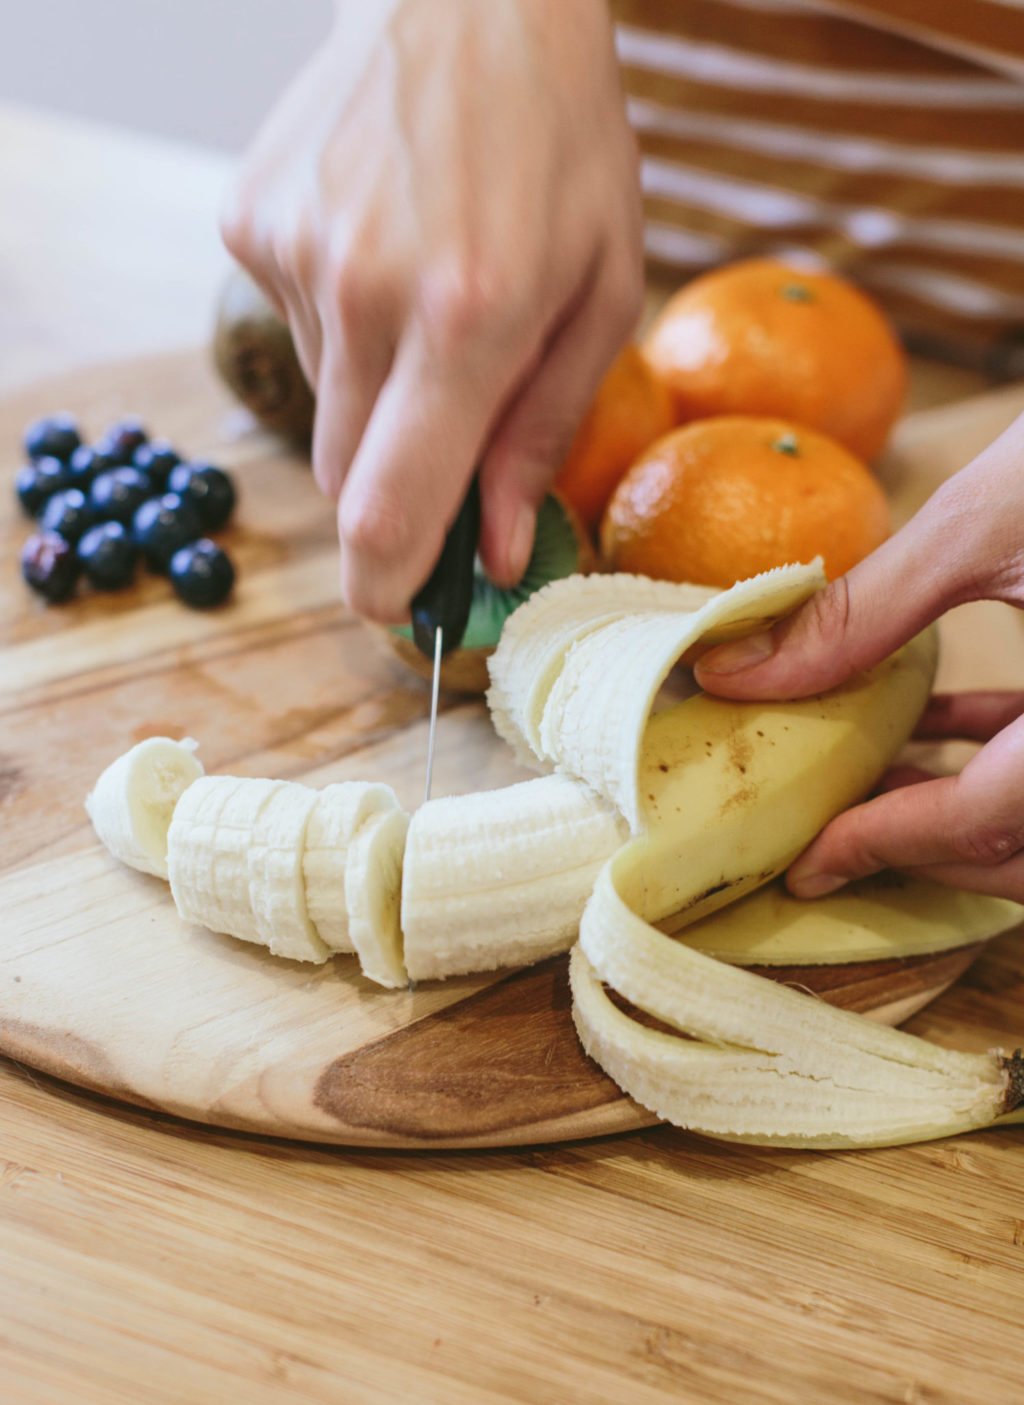 Banana being sliced by a knife on a chopping board, surrounded by fruit.